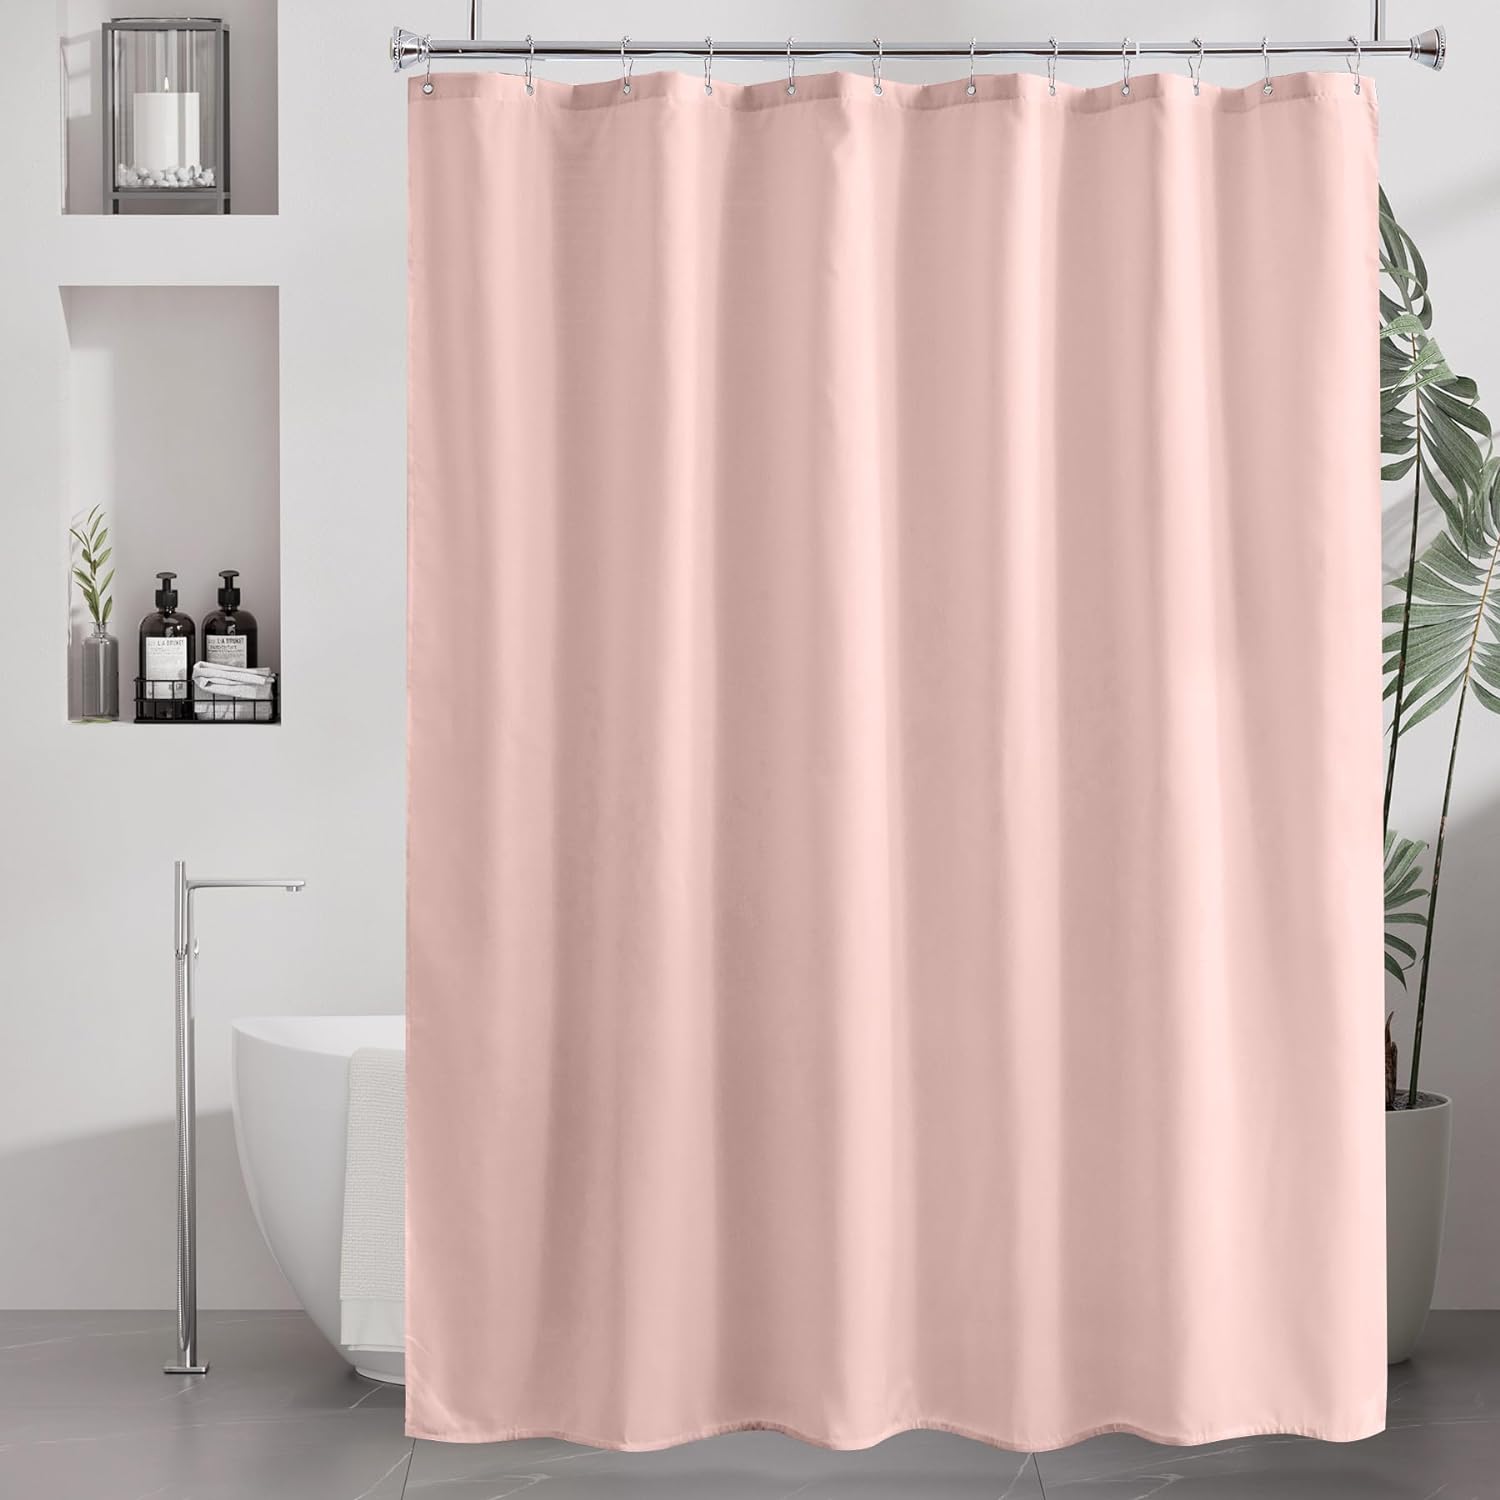 Amazer Blush Pink Shower Liner Cloth Waterproof, Soft Blush Pink Shower Curtain Liner Fabric with Weighted Stones, Washable Shower Curtain and Liner 2-in-1, 12 Grommet Holes, 72 x 72 Inches